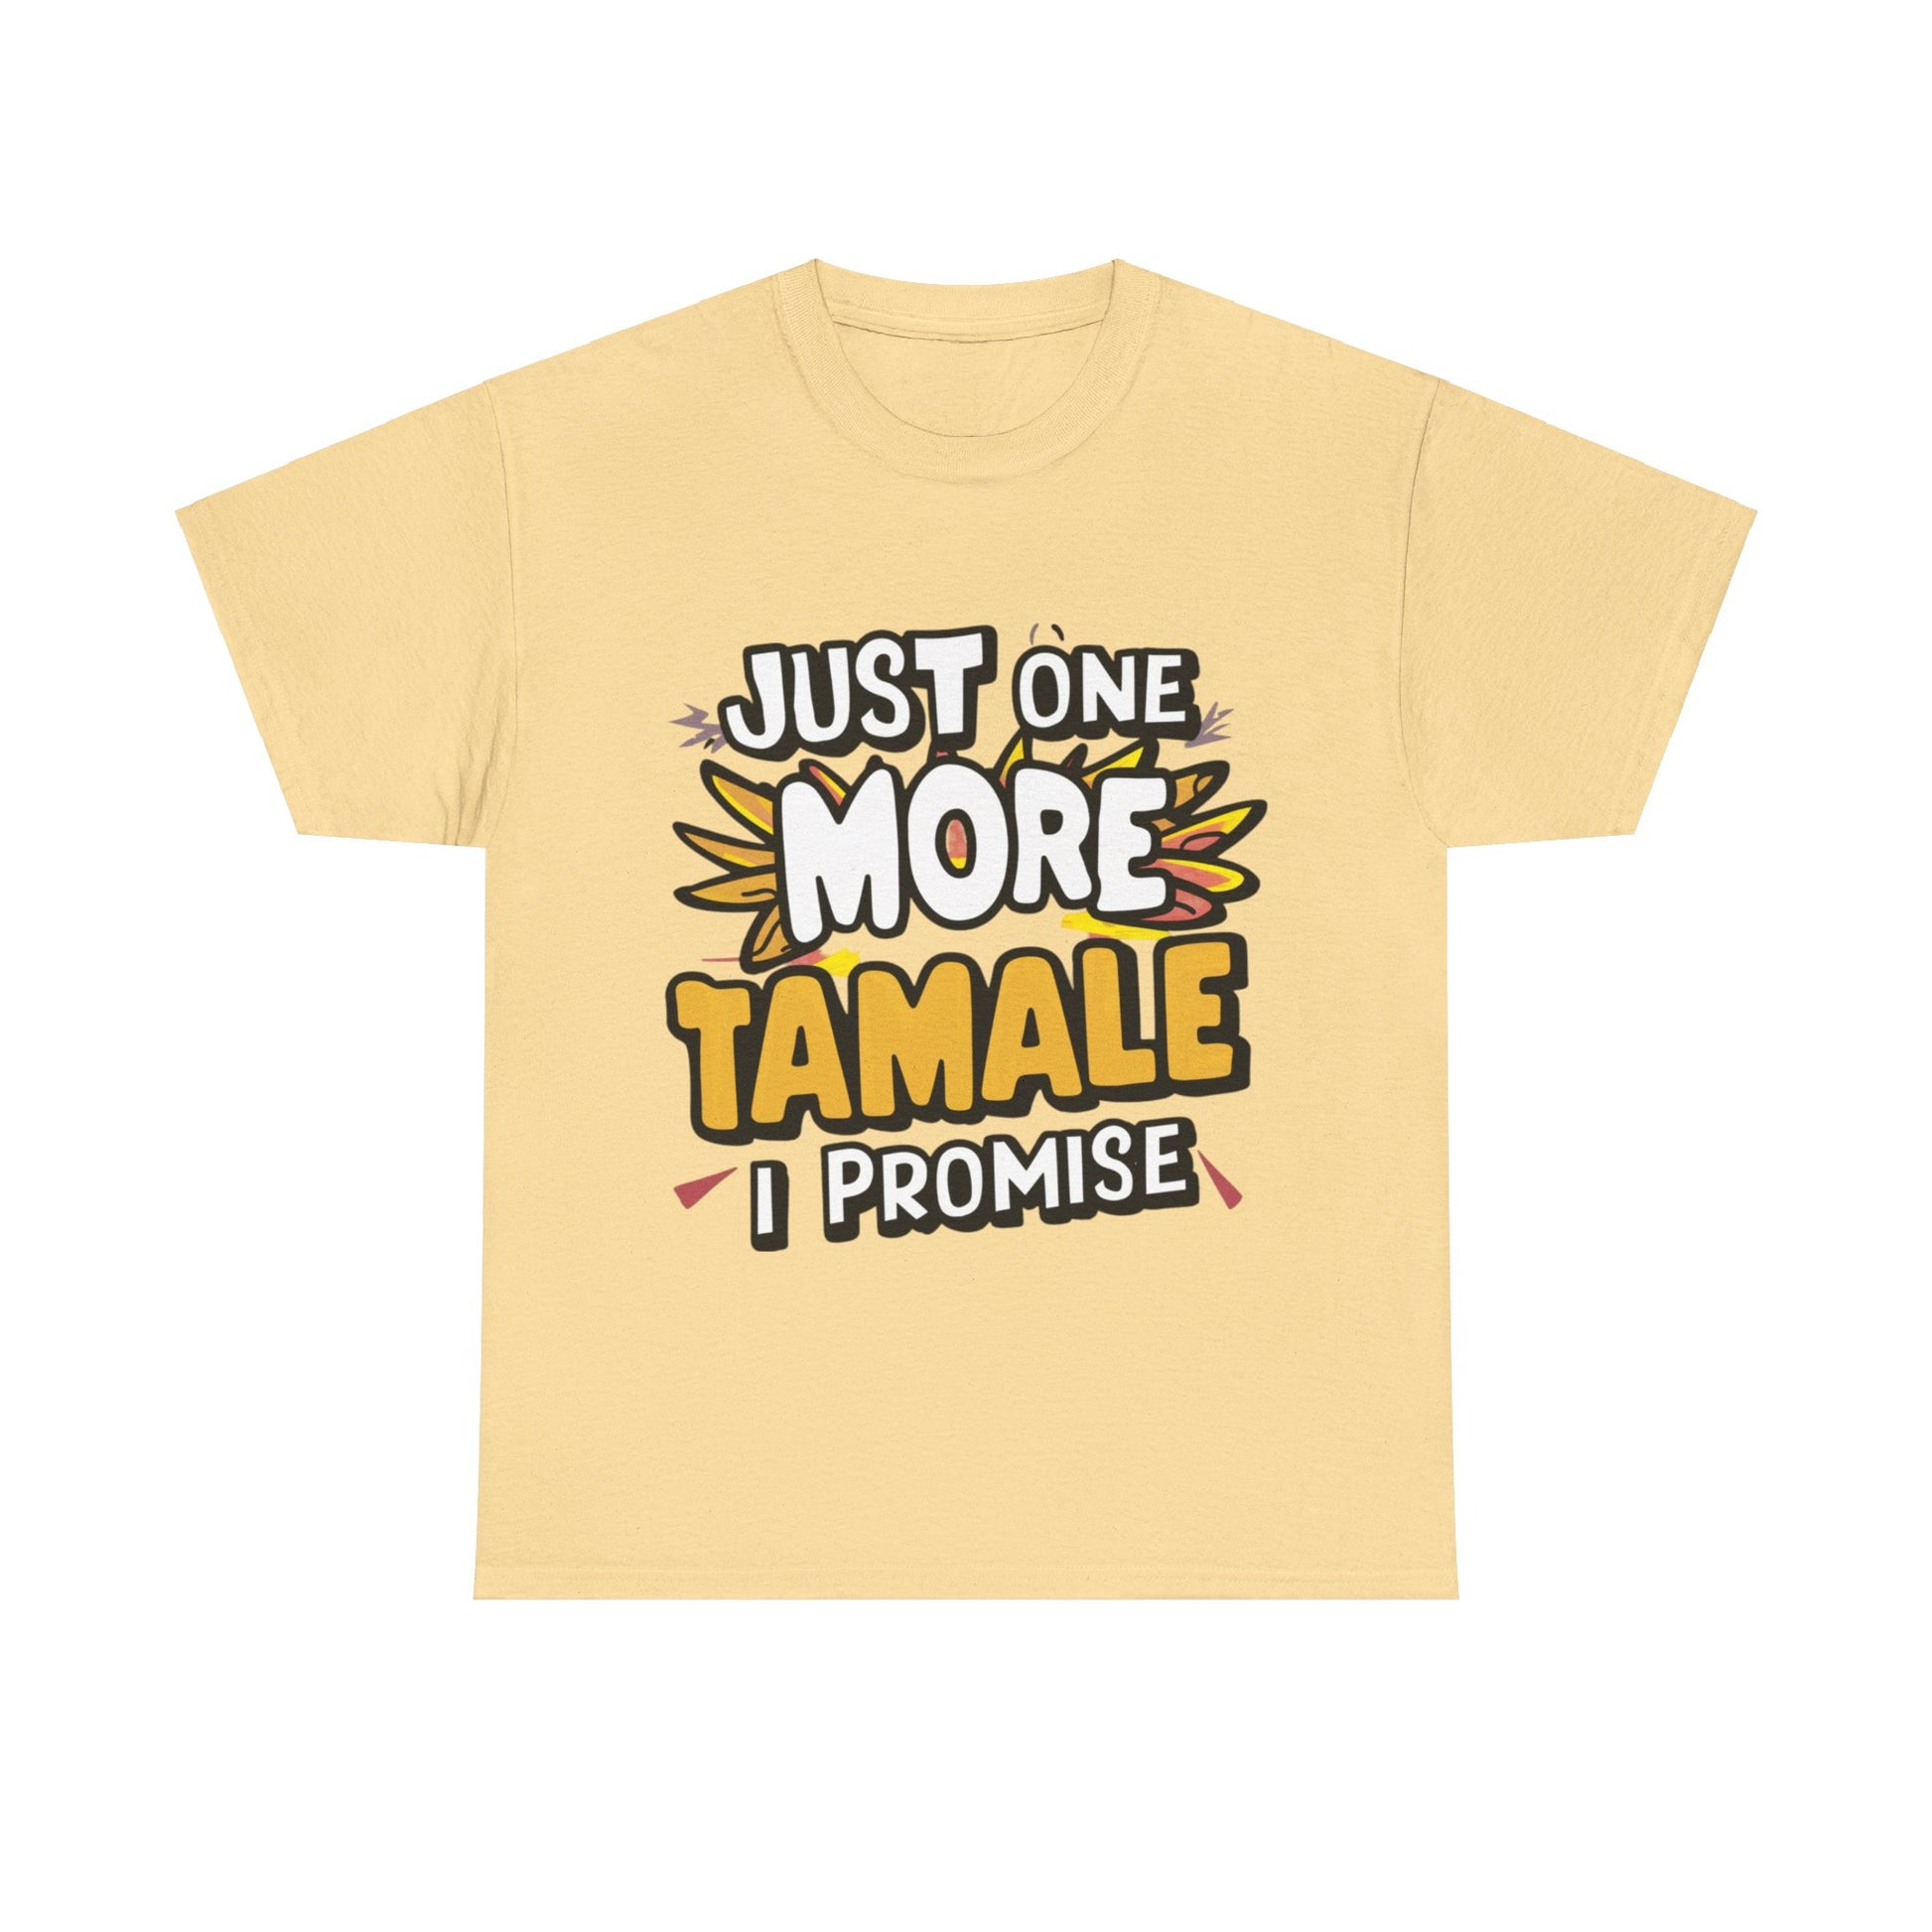 Just One More Tamale I Promise Mexican Food Graphic Unisex Heavy Cotton Tee Cotton Funny Humorous Graphic Soft Premium Unisex Men Women Yellow Haze T-shirt Birthday Gift-11